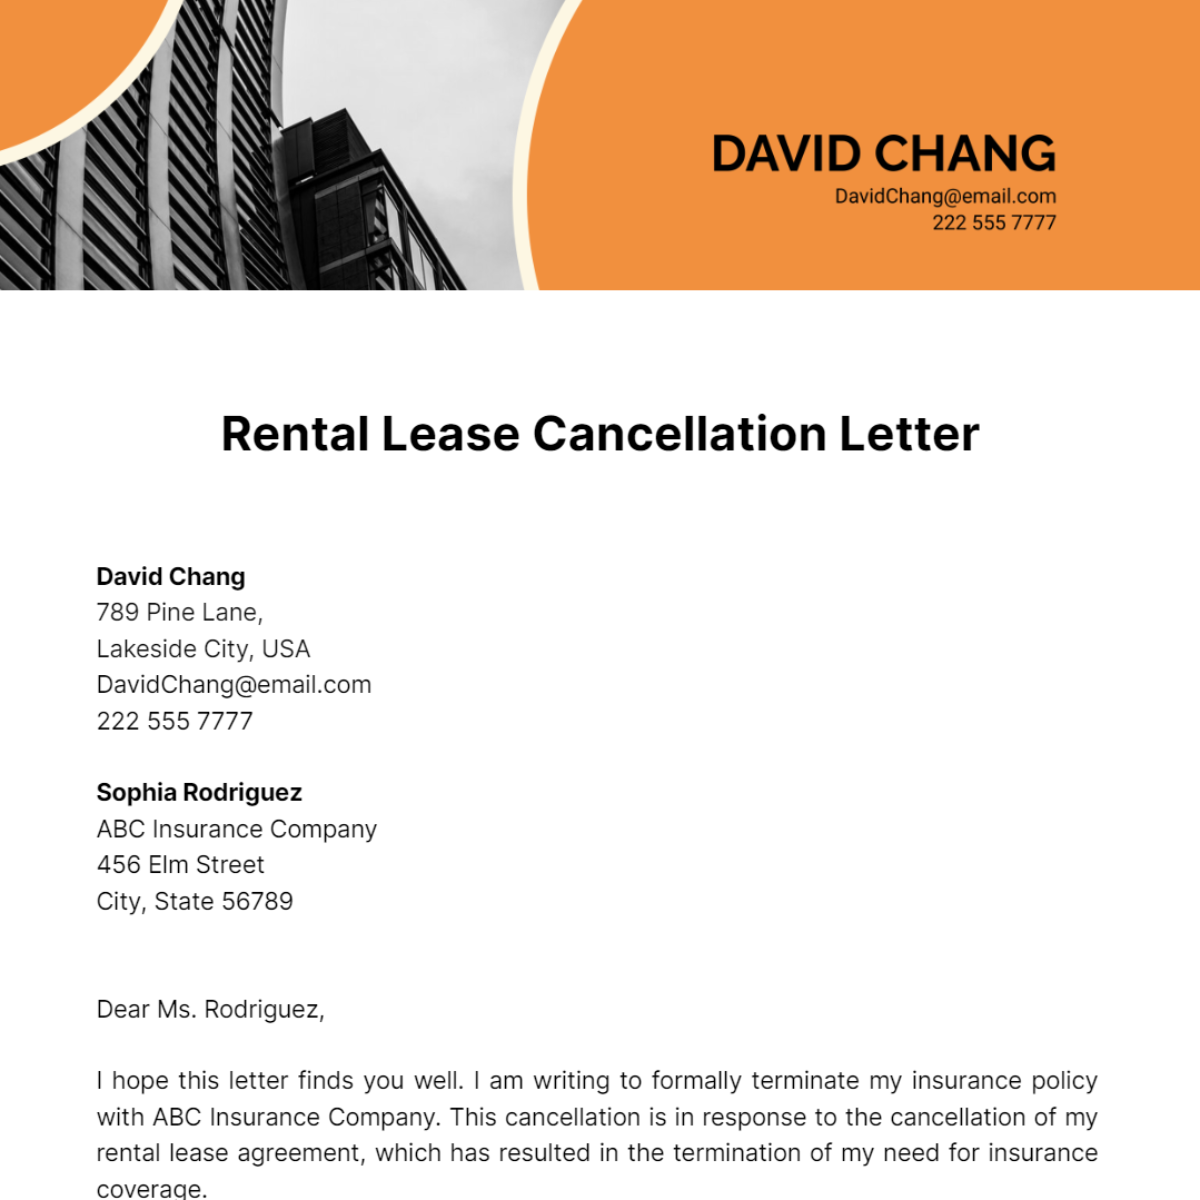 Rental Lease Cancellation Letter Template